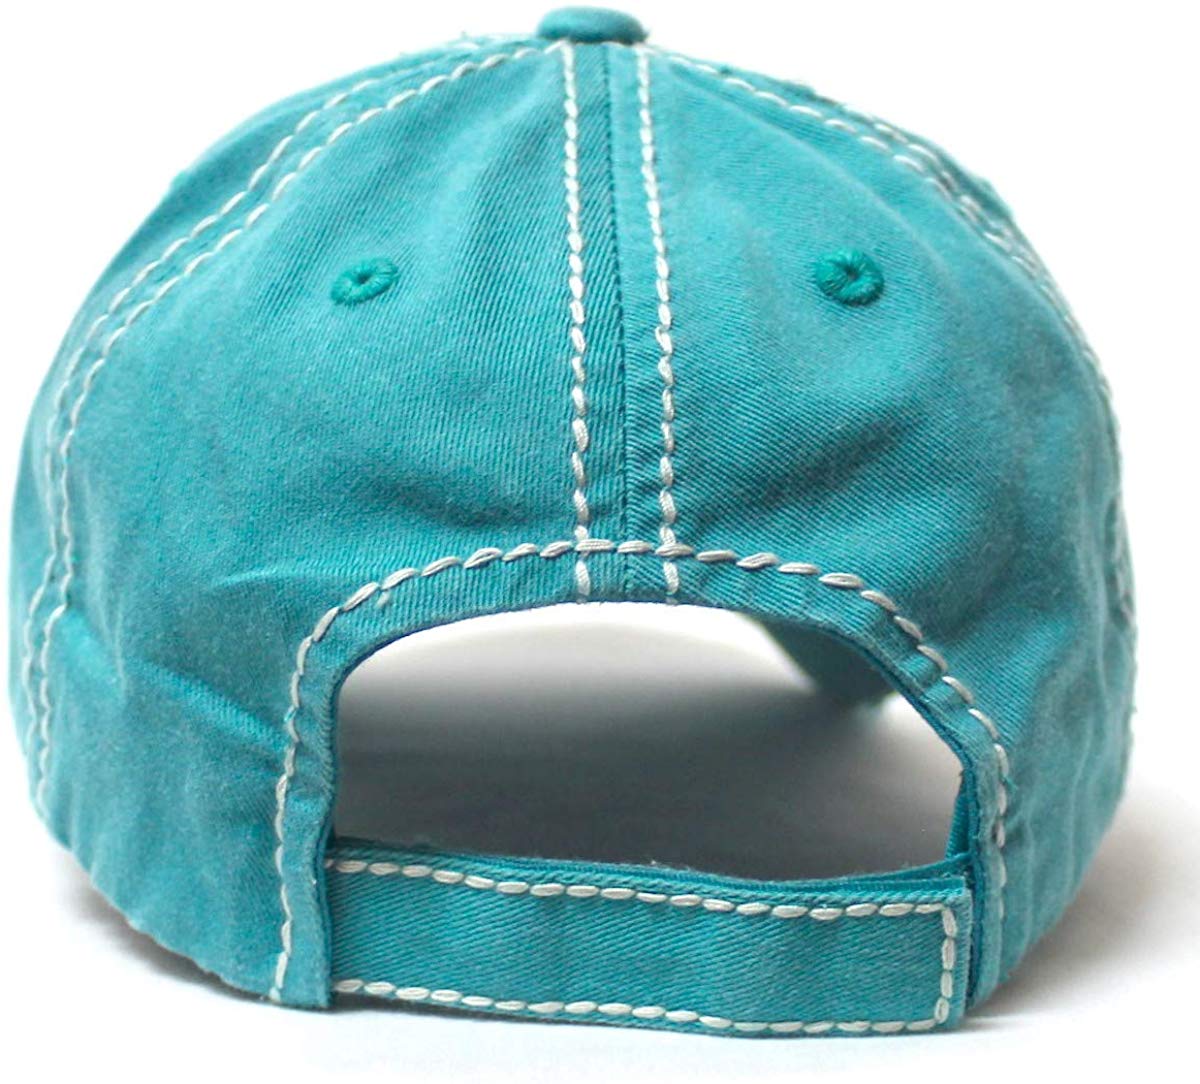 CAPS 'N VINTAGE Women's Ballcap Margarita with My Senoritas Beach Themed Patch Embroidery Hat, Turquoise Blue - Caps 'N Vintage 